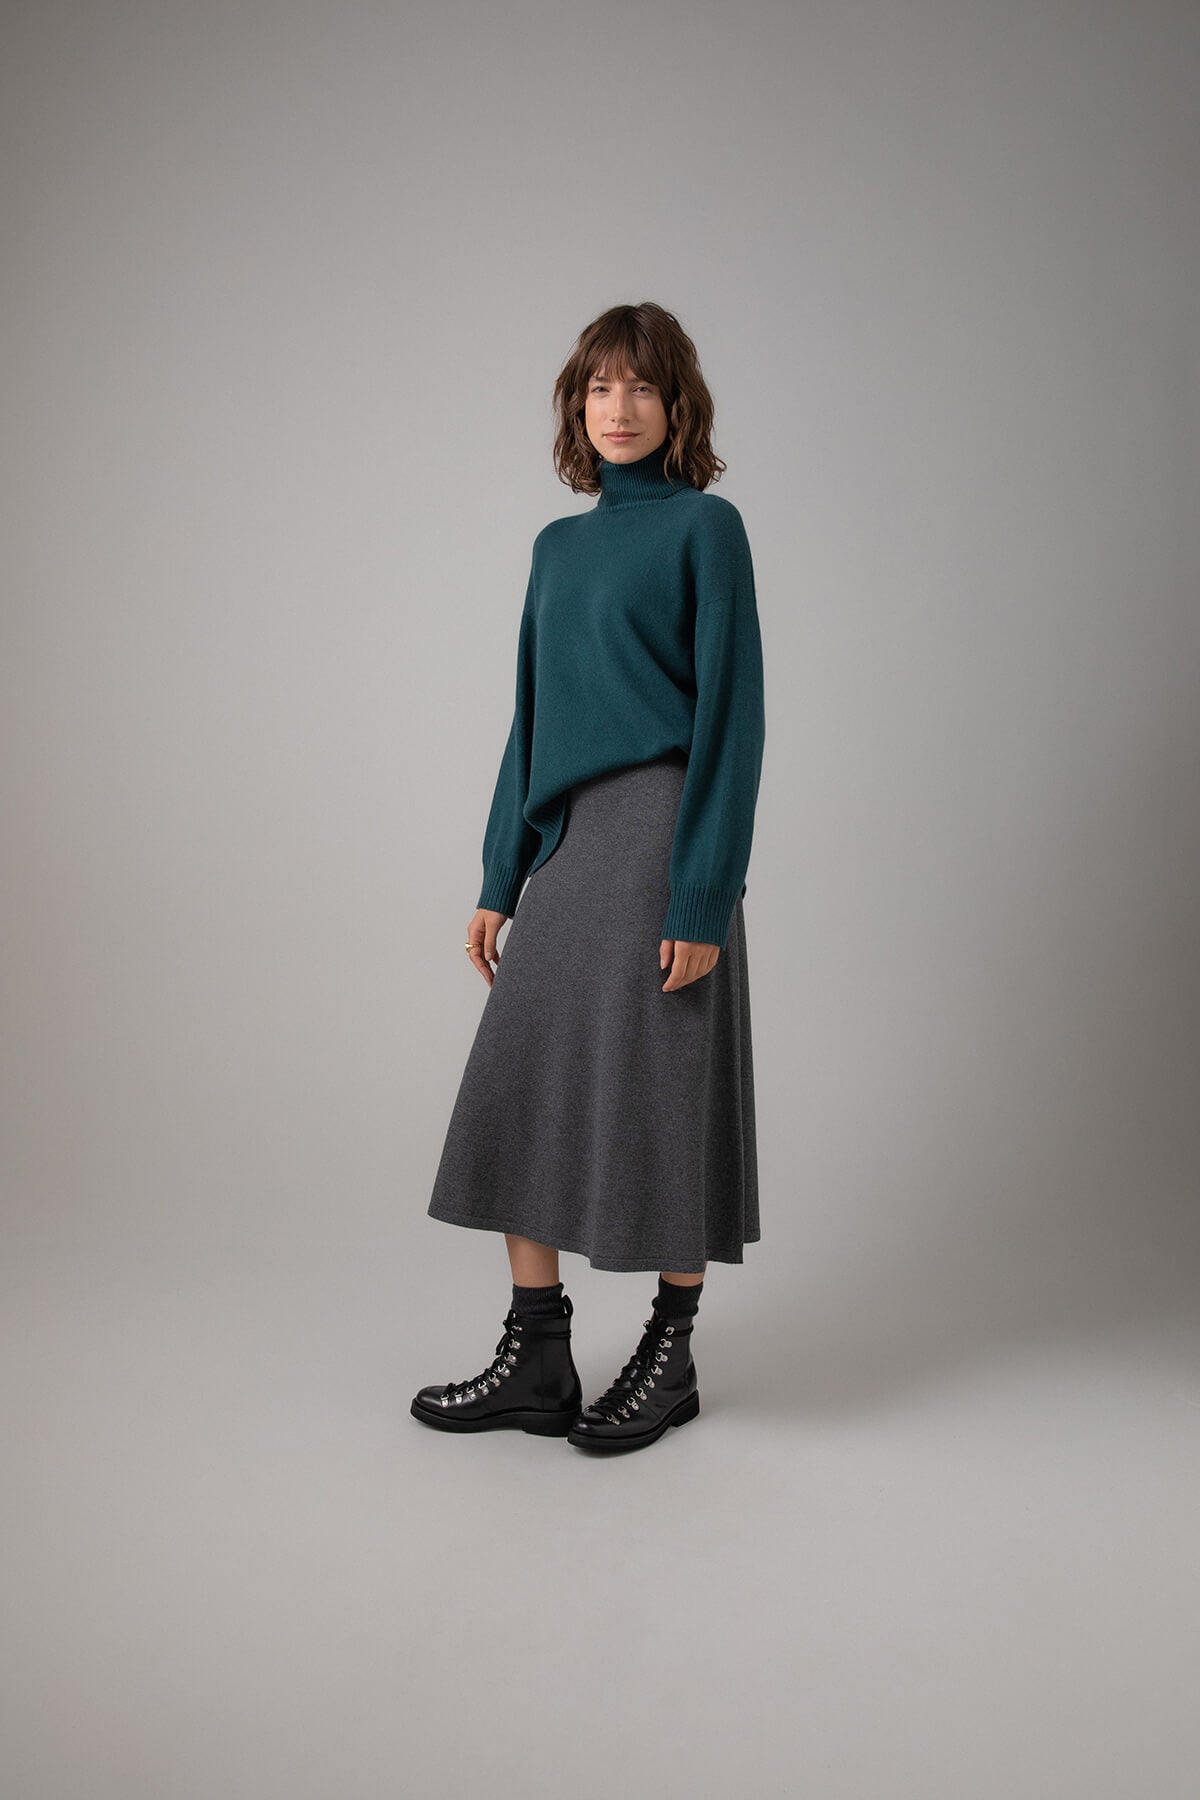 Side view of a Johnstons of Elgin Women's A-Line Cashmere Skirt in Mid Grey worn with a Mallard Roll Neck Sweater on a grey background KAP05097HA4181